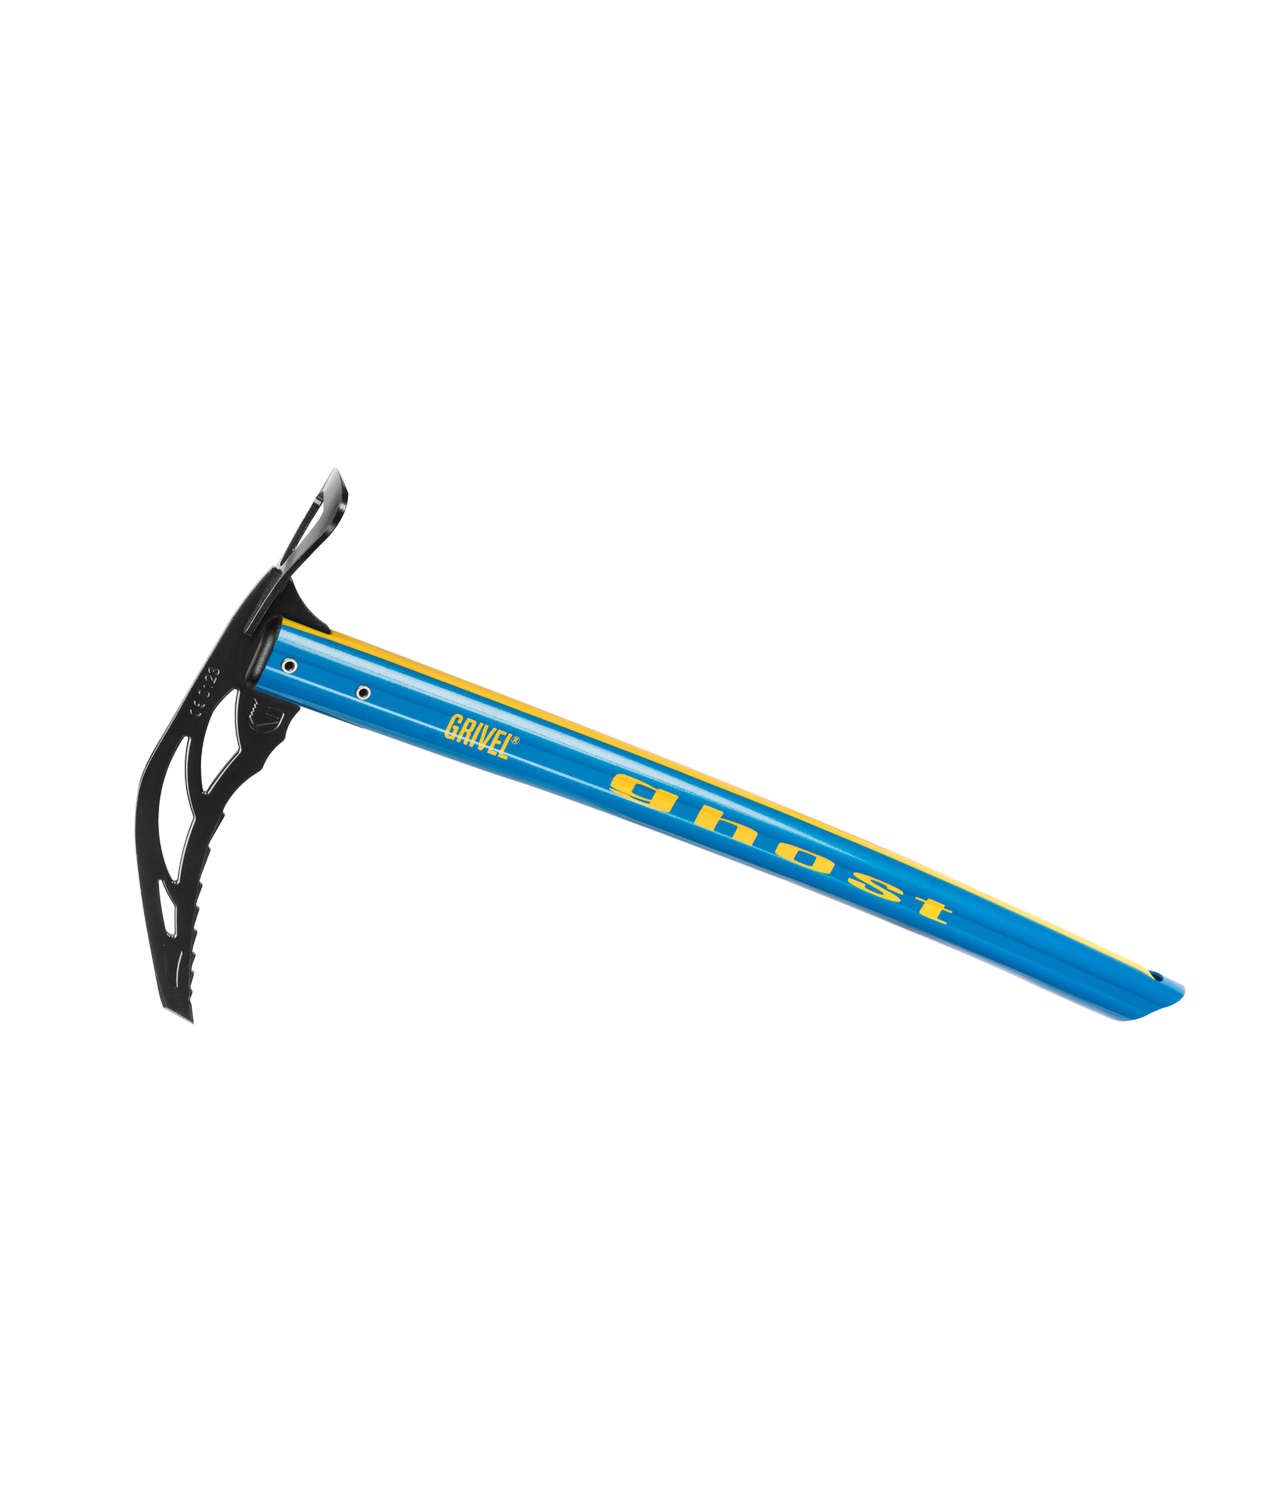 Grivel GHOST ice axe Fast and Light Switzerland 02